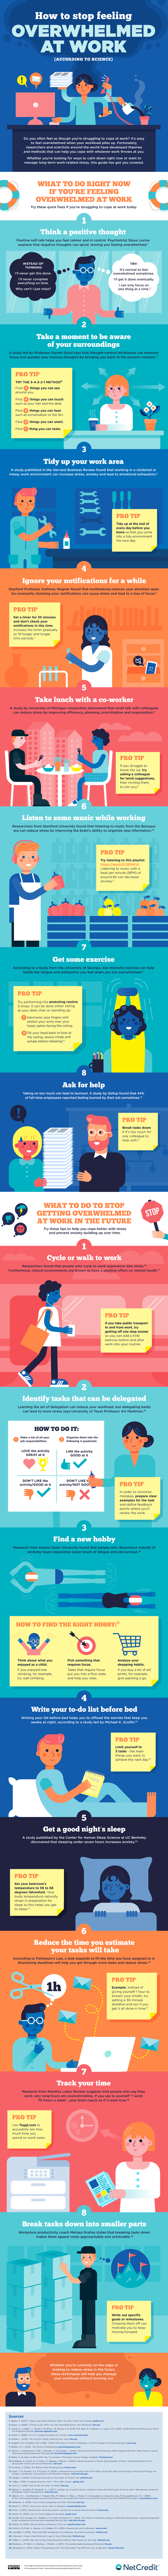 Stress techniques infographic to stop feeling overwhelmed